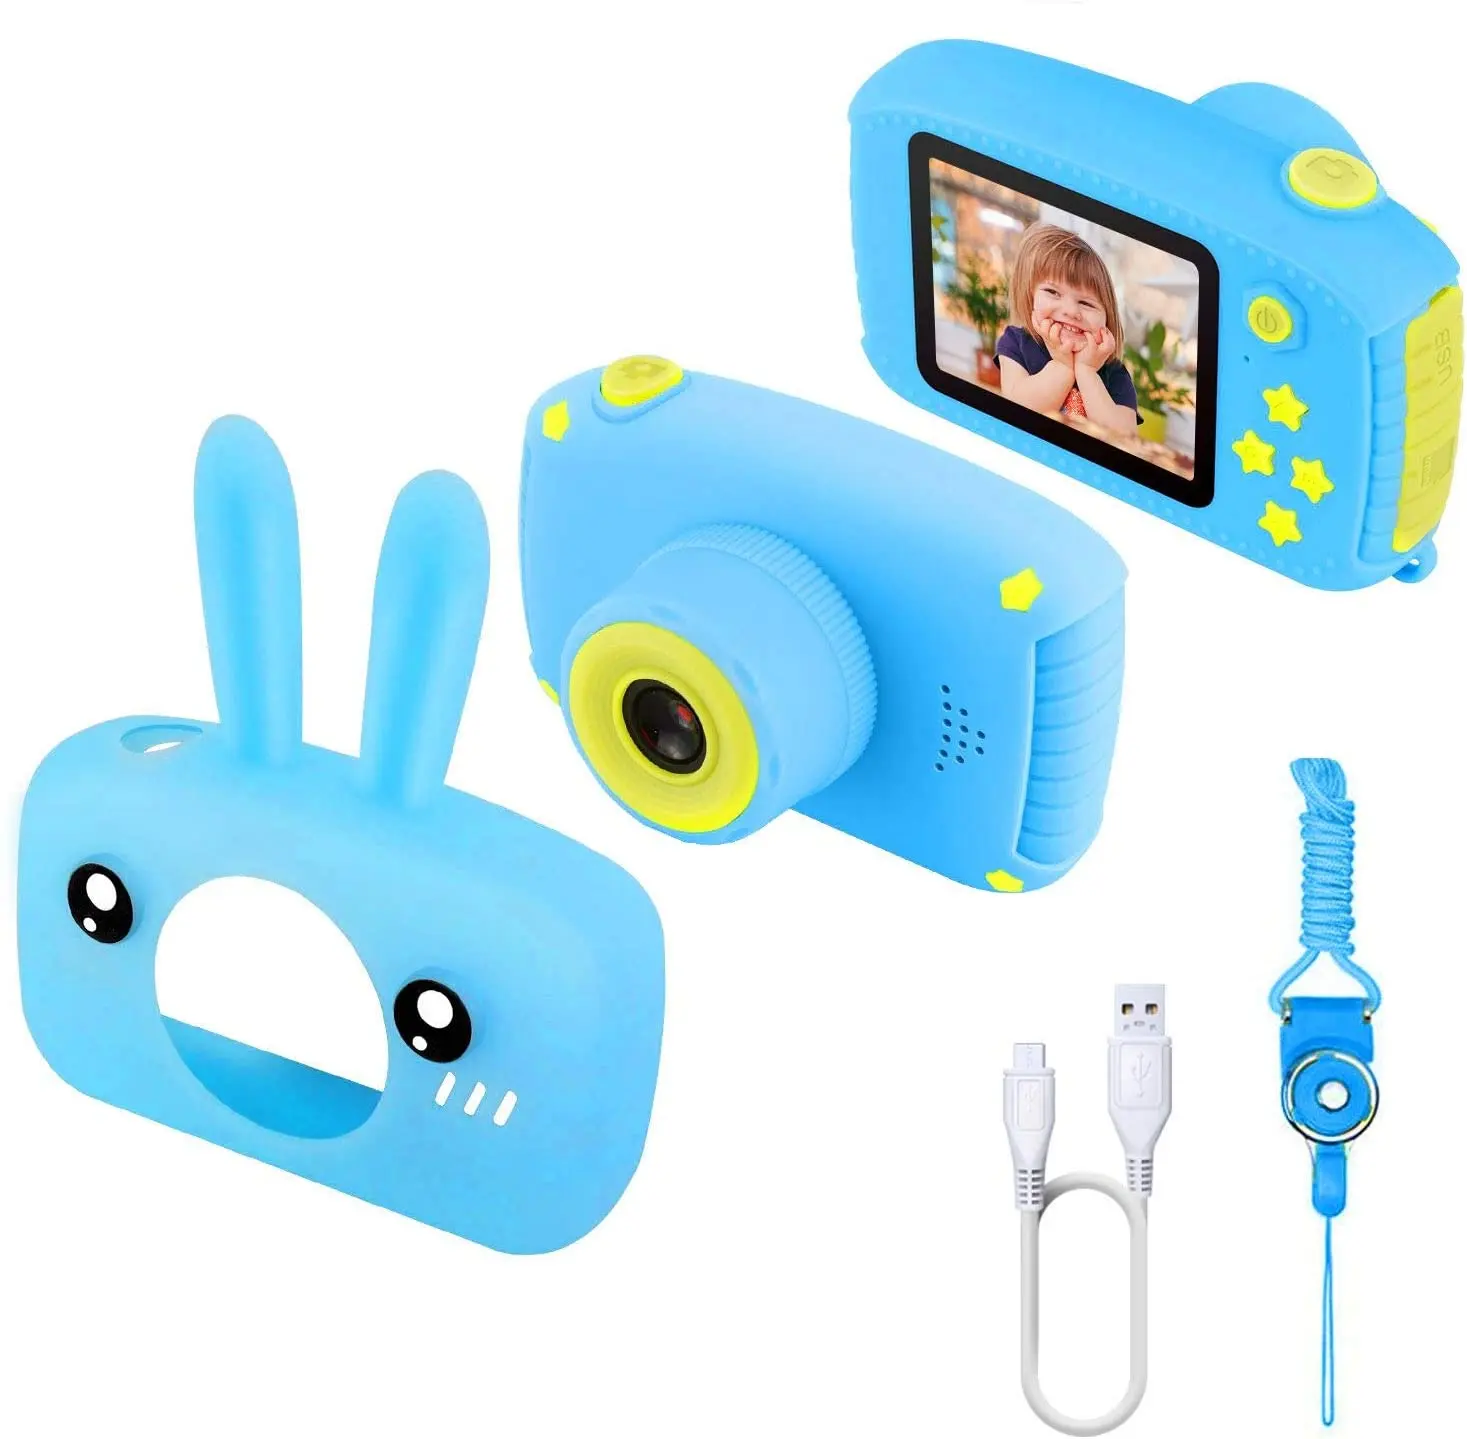 Kids camera children's Special Camera Recordings Videos Great Gifts mini Action DV Camera Cartoon Toy Gift For Children